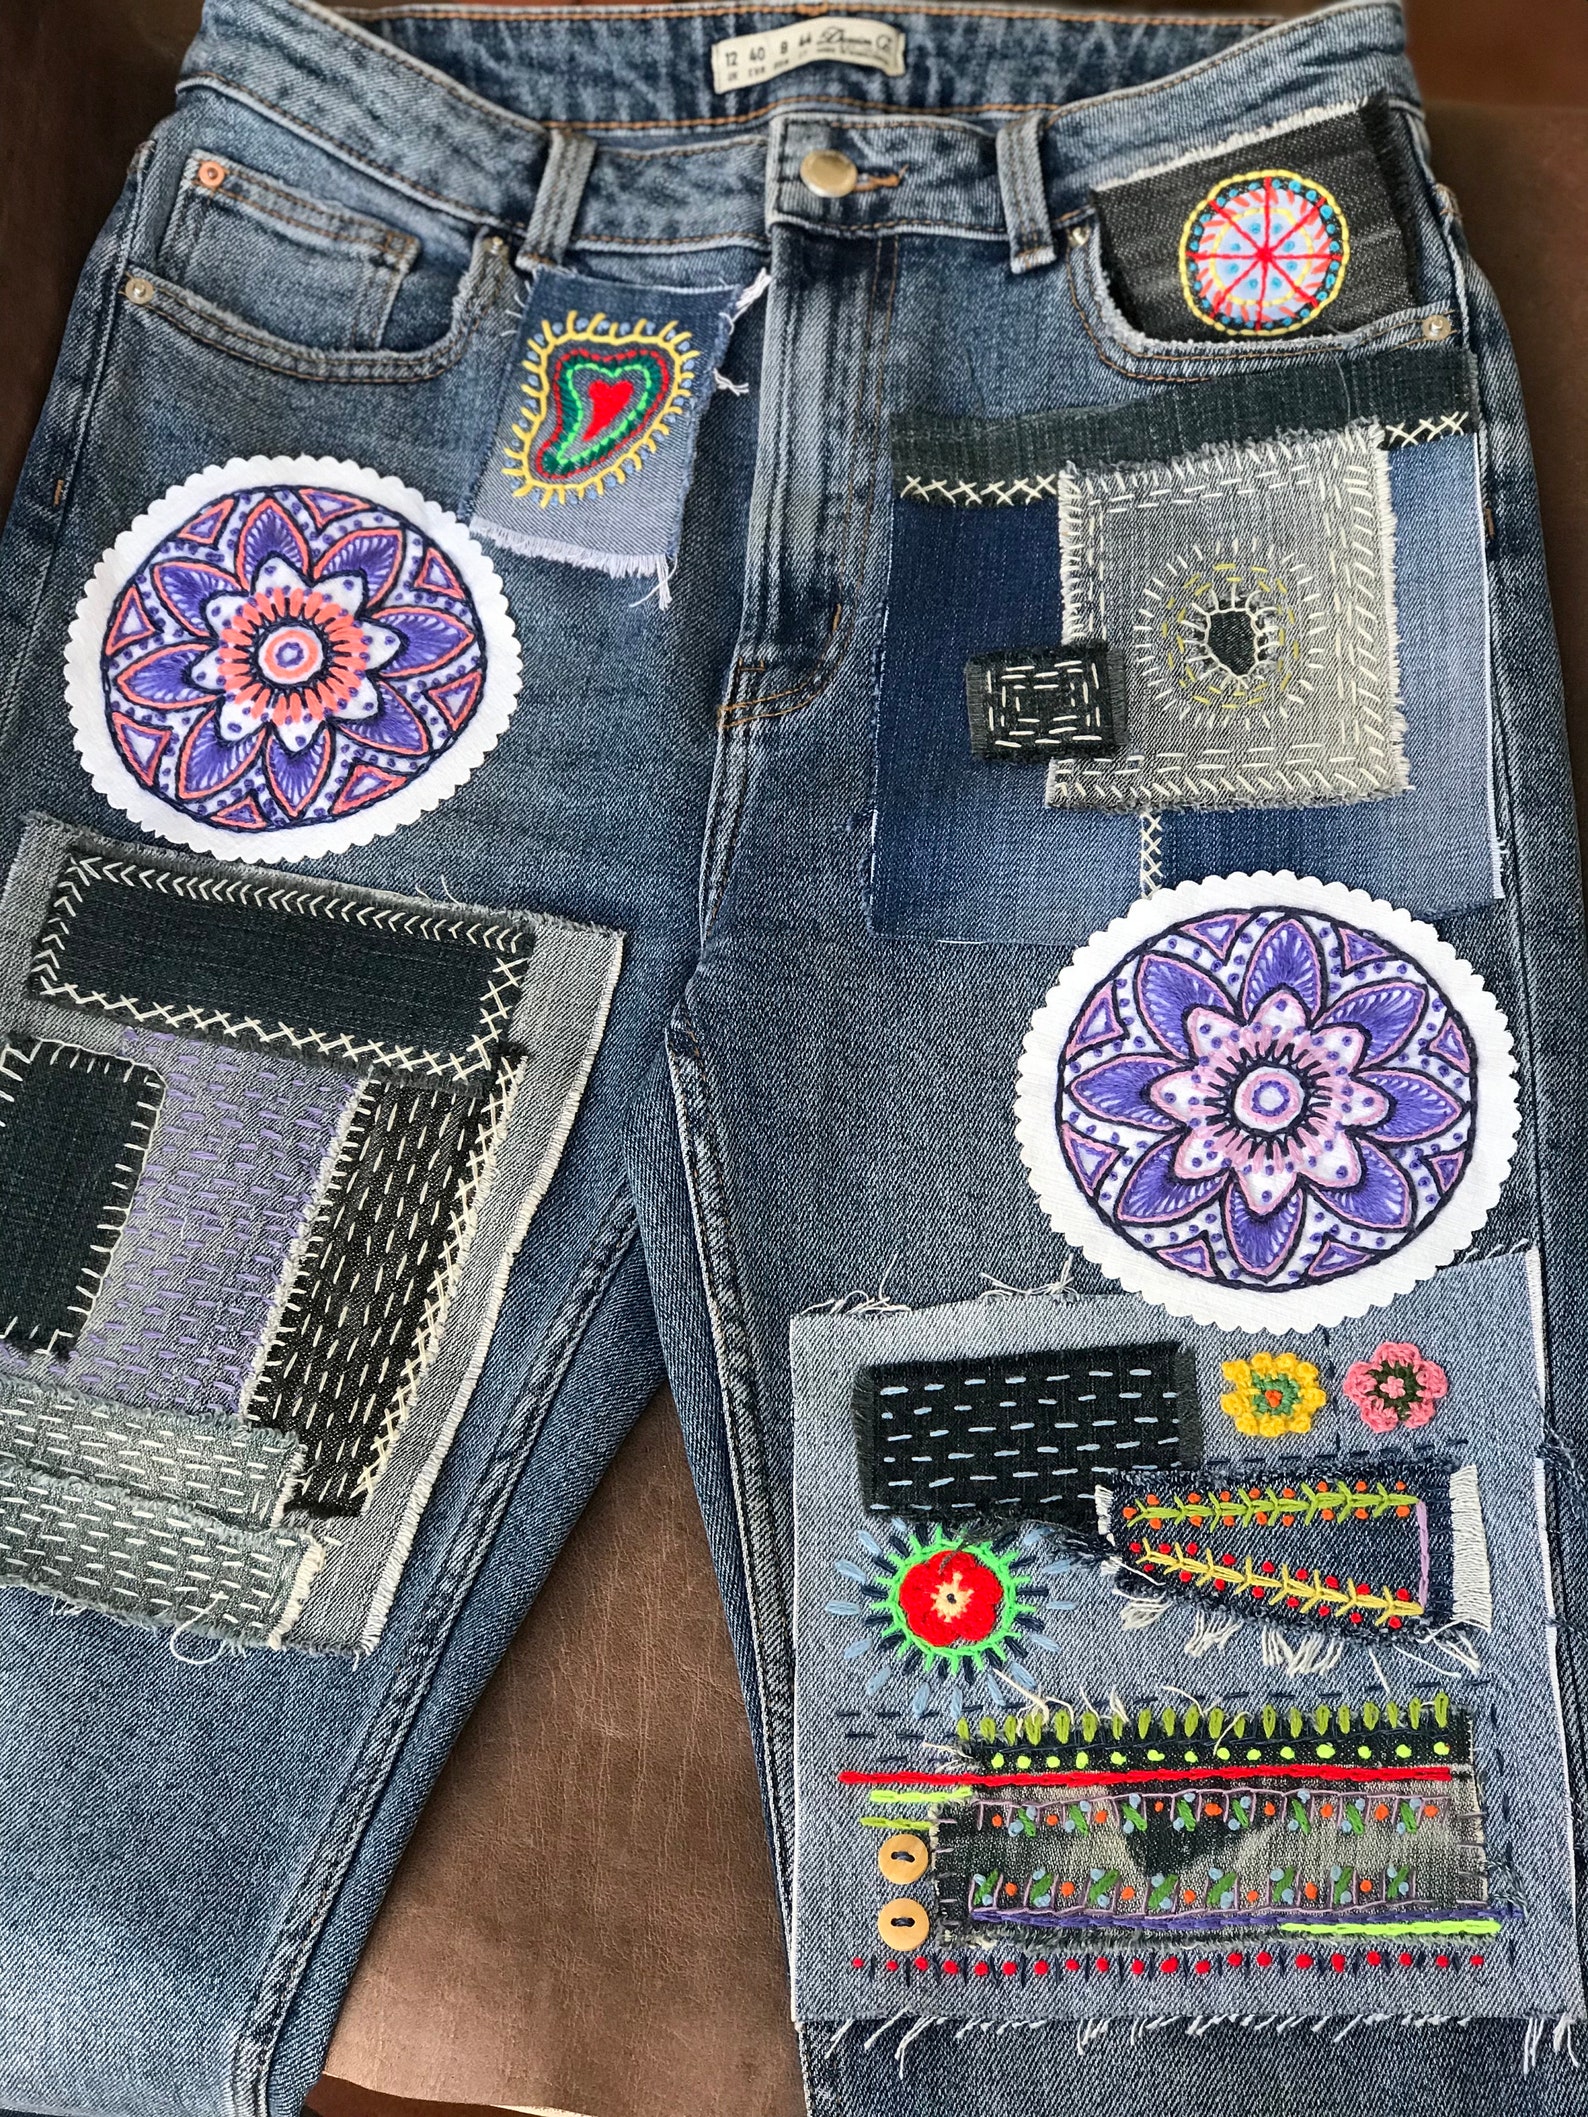 Floral Hand Embroidered Mandala Denim Sew-on Patches Boho - Etsy